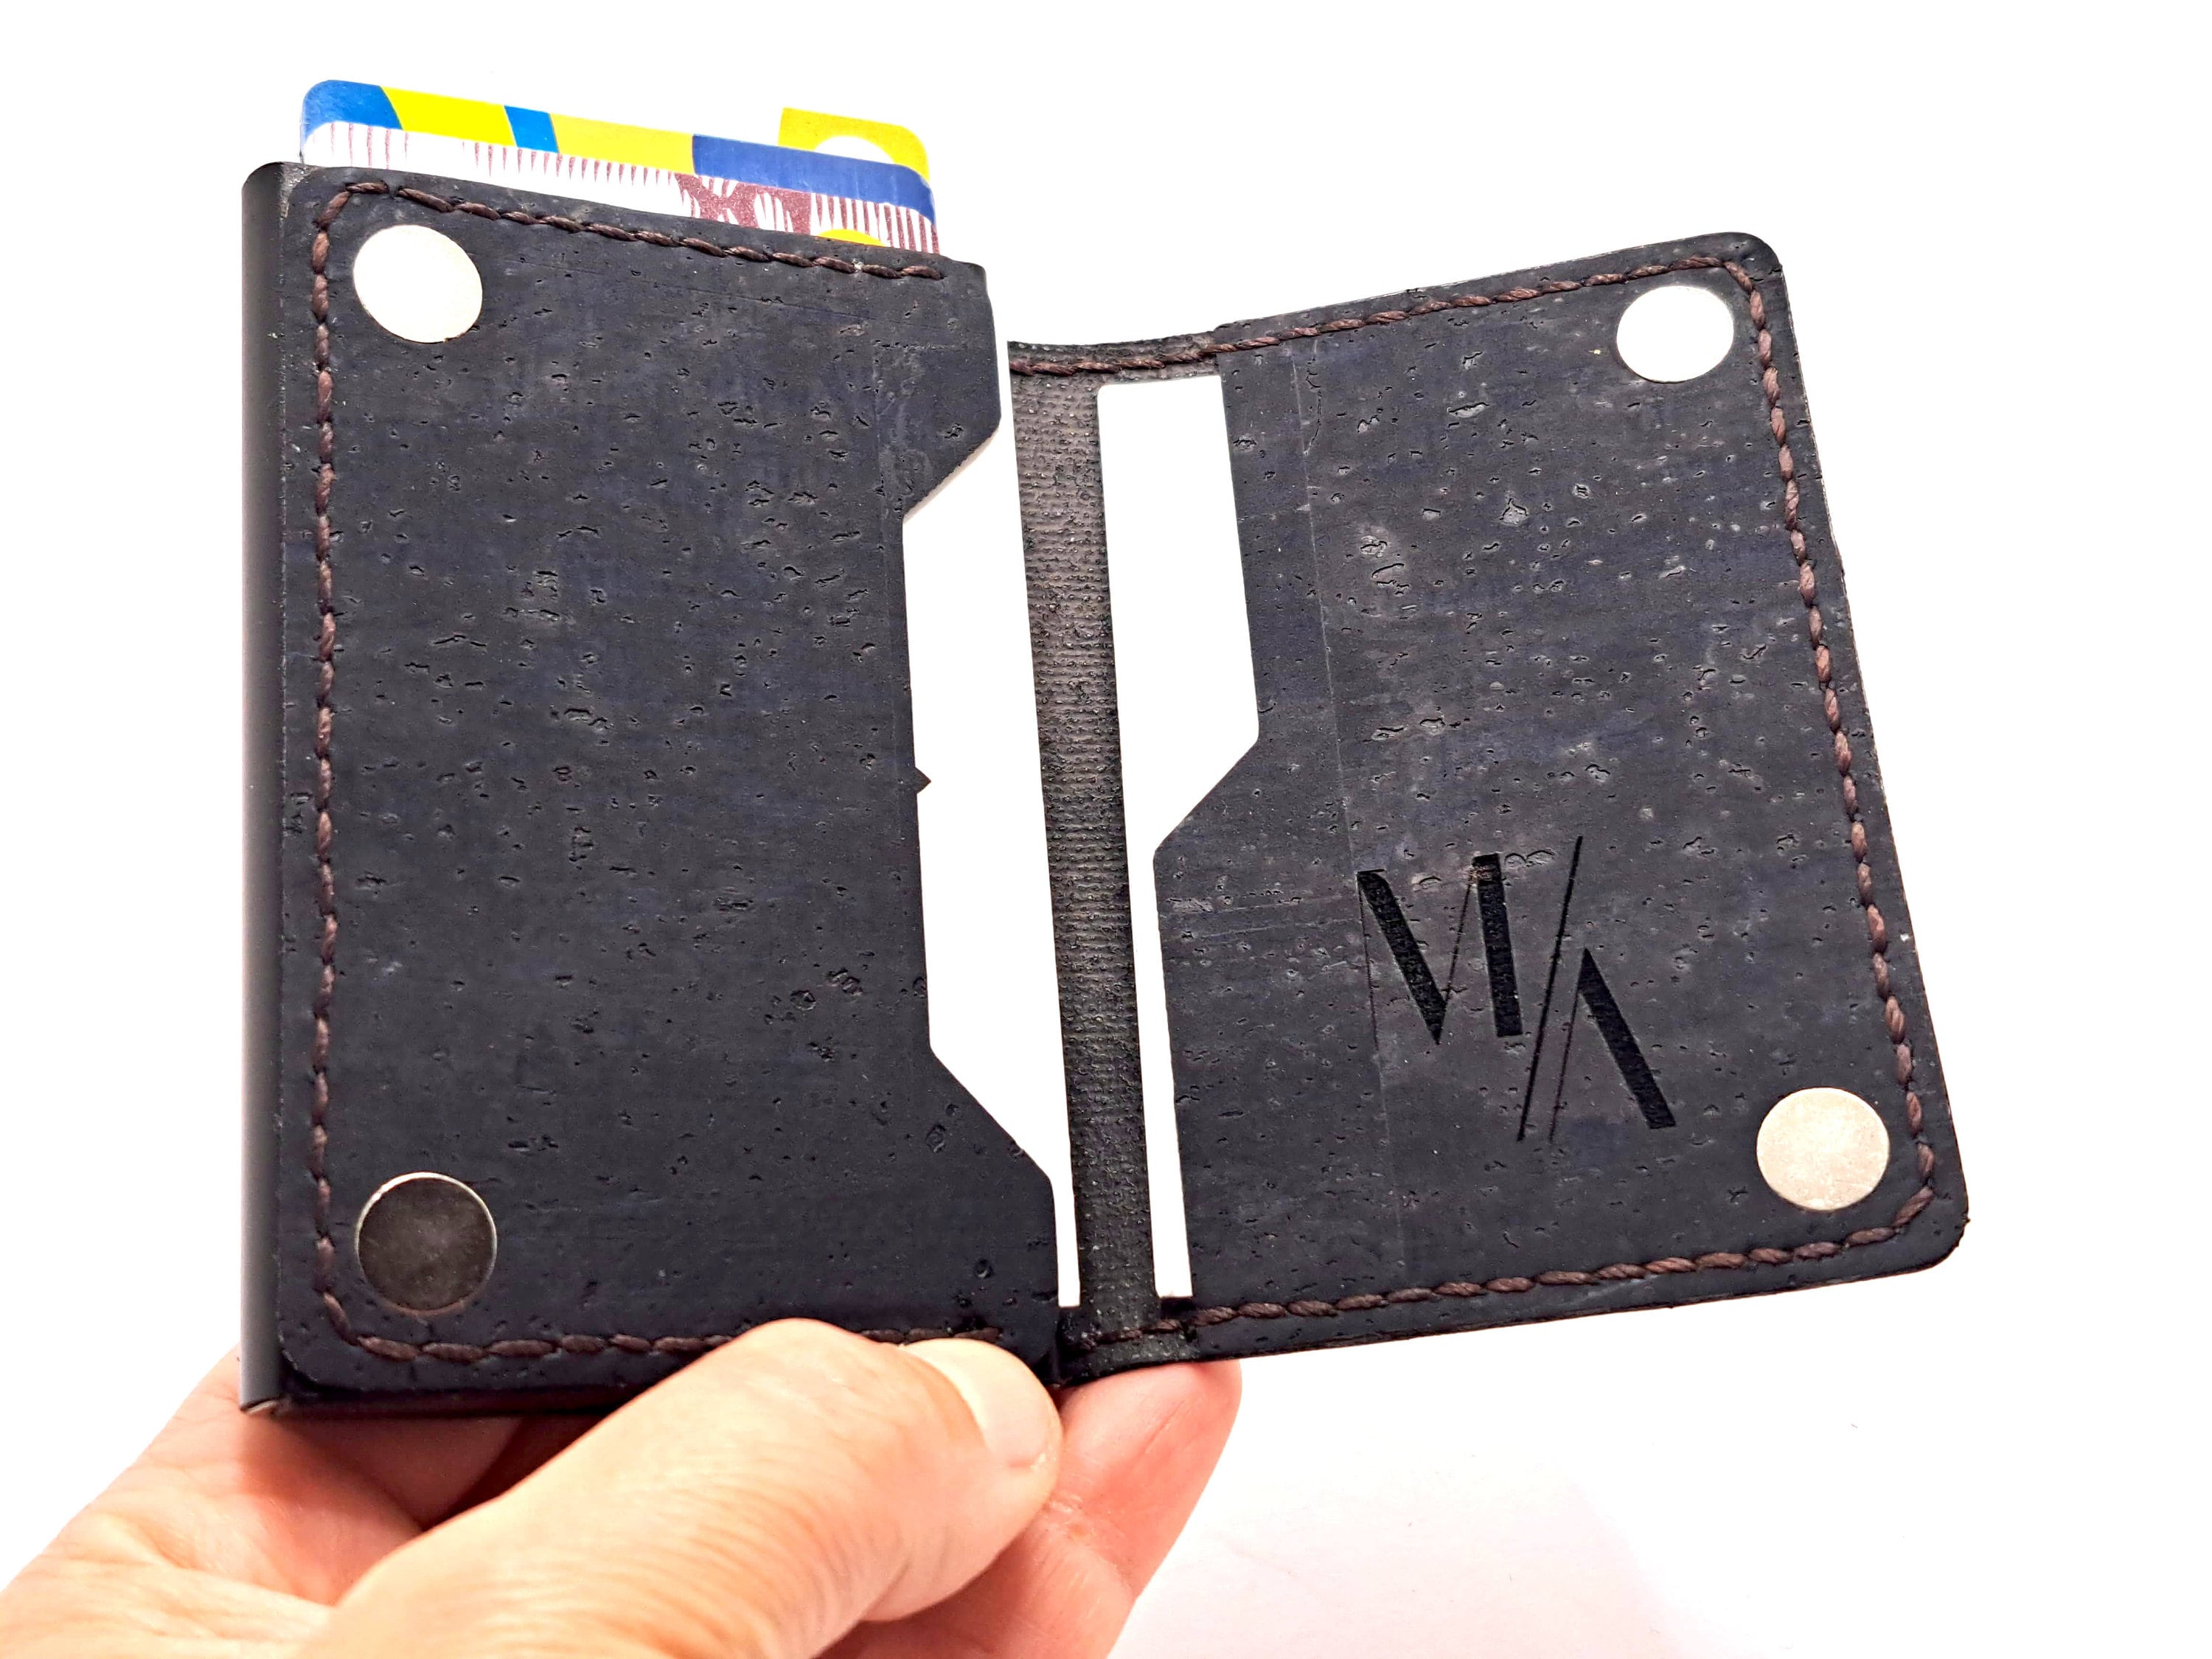 New Arrive Minimalist Women's Card Wallet, Large Capacity Multifunctional  Accordion Cardholder Purse With Anti-magnetic Function